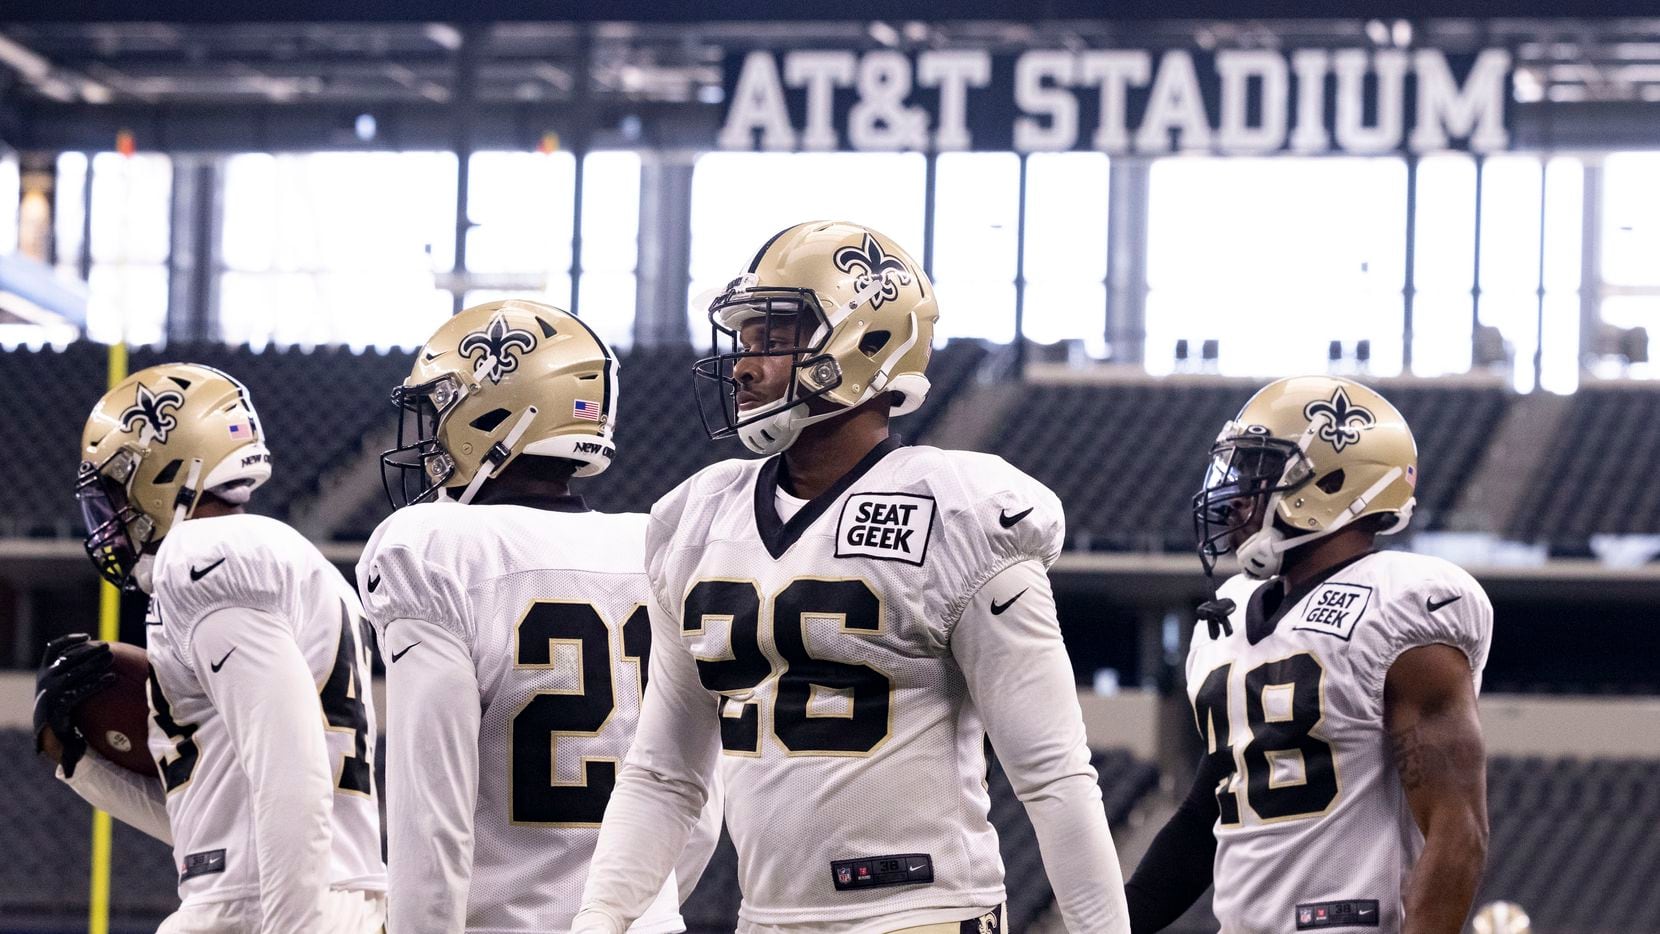 New Orleans Saints practice on Monday, Aug. 30, 2021, at AT&T Stadium in Arlington. The New Orleans Saints are practicing at AT&T Stadium after evacuating from Hurricane Ida.